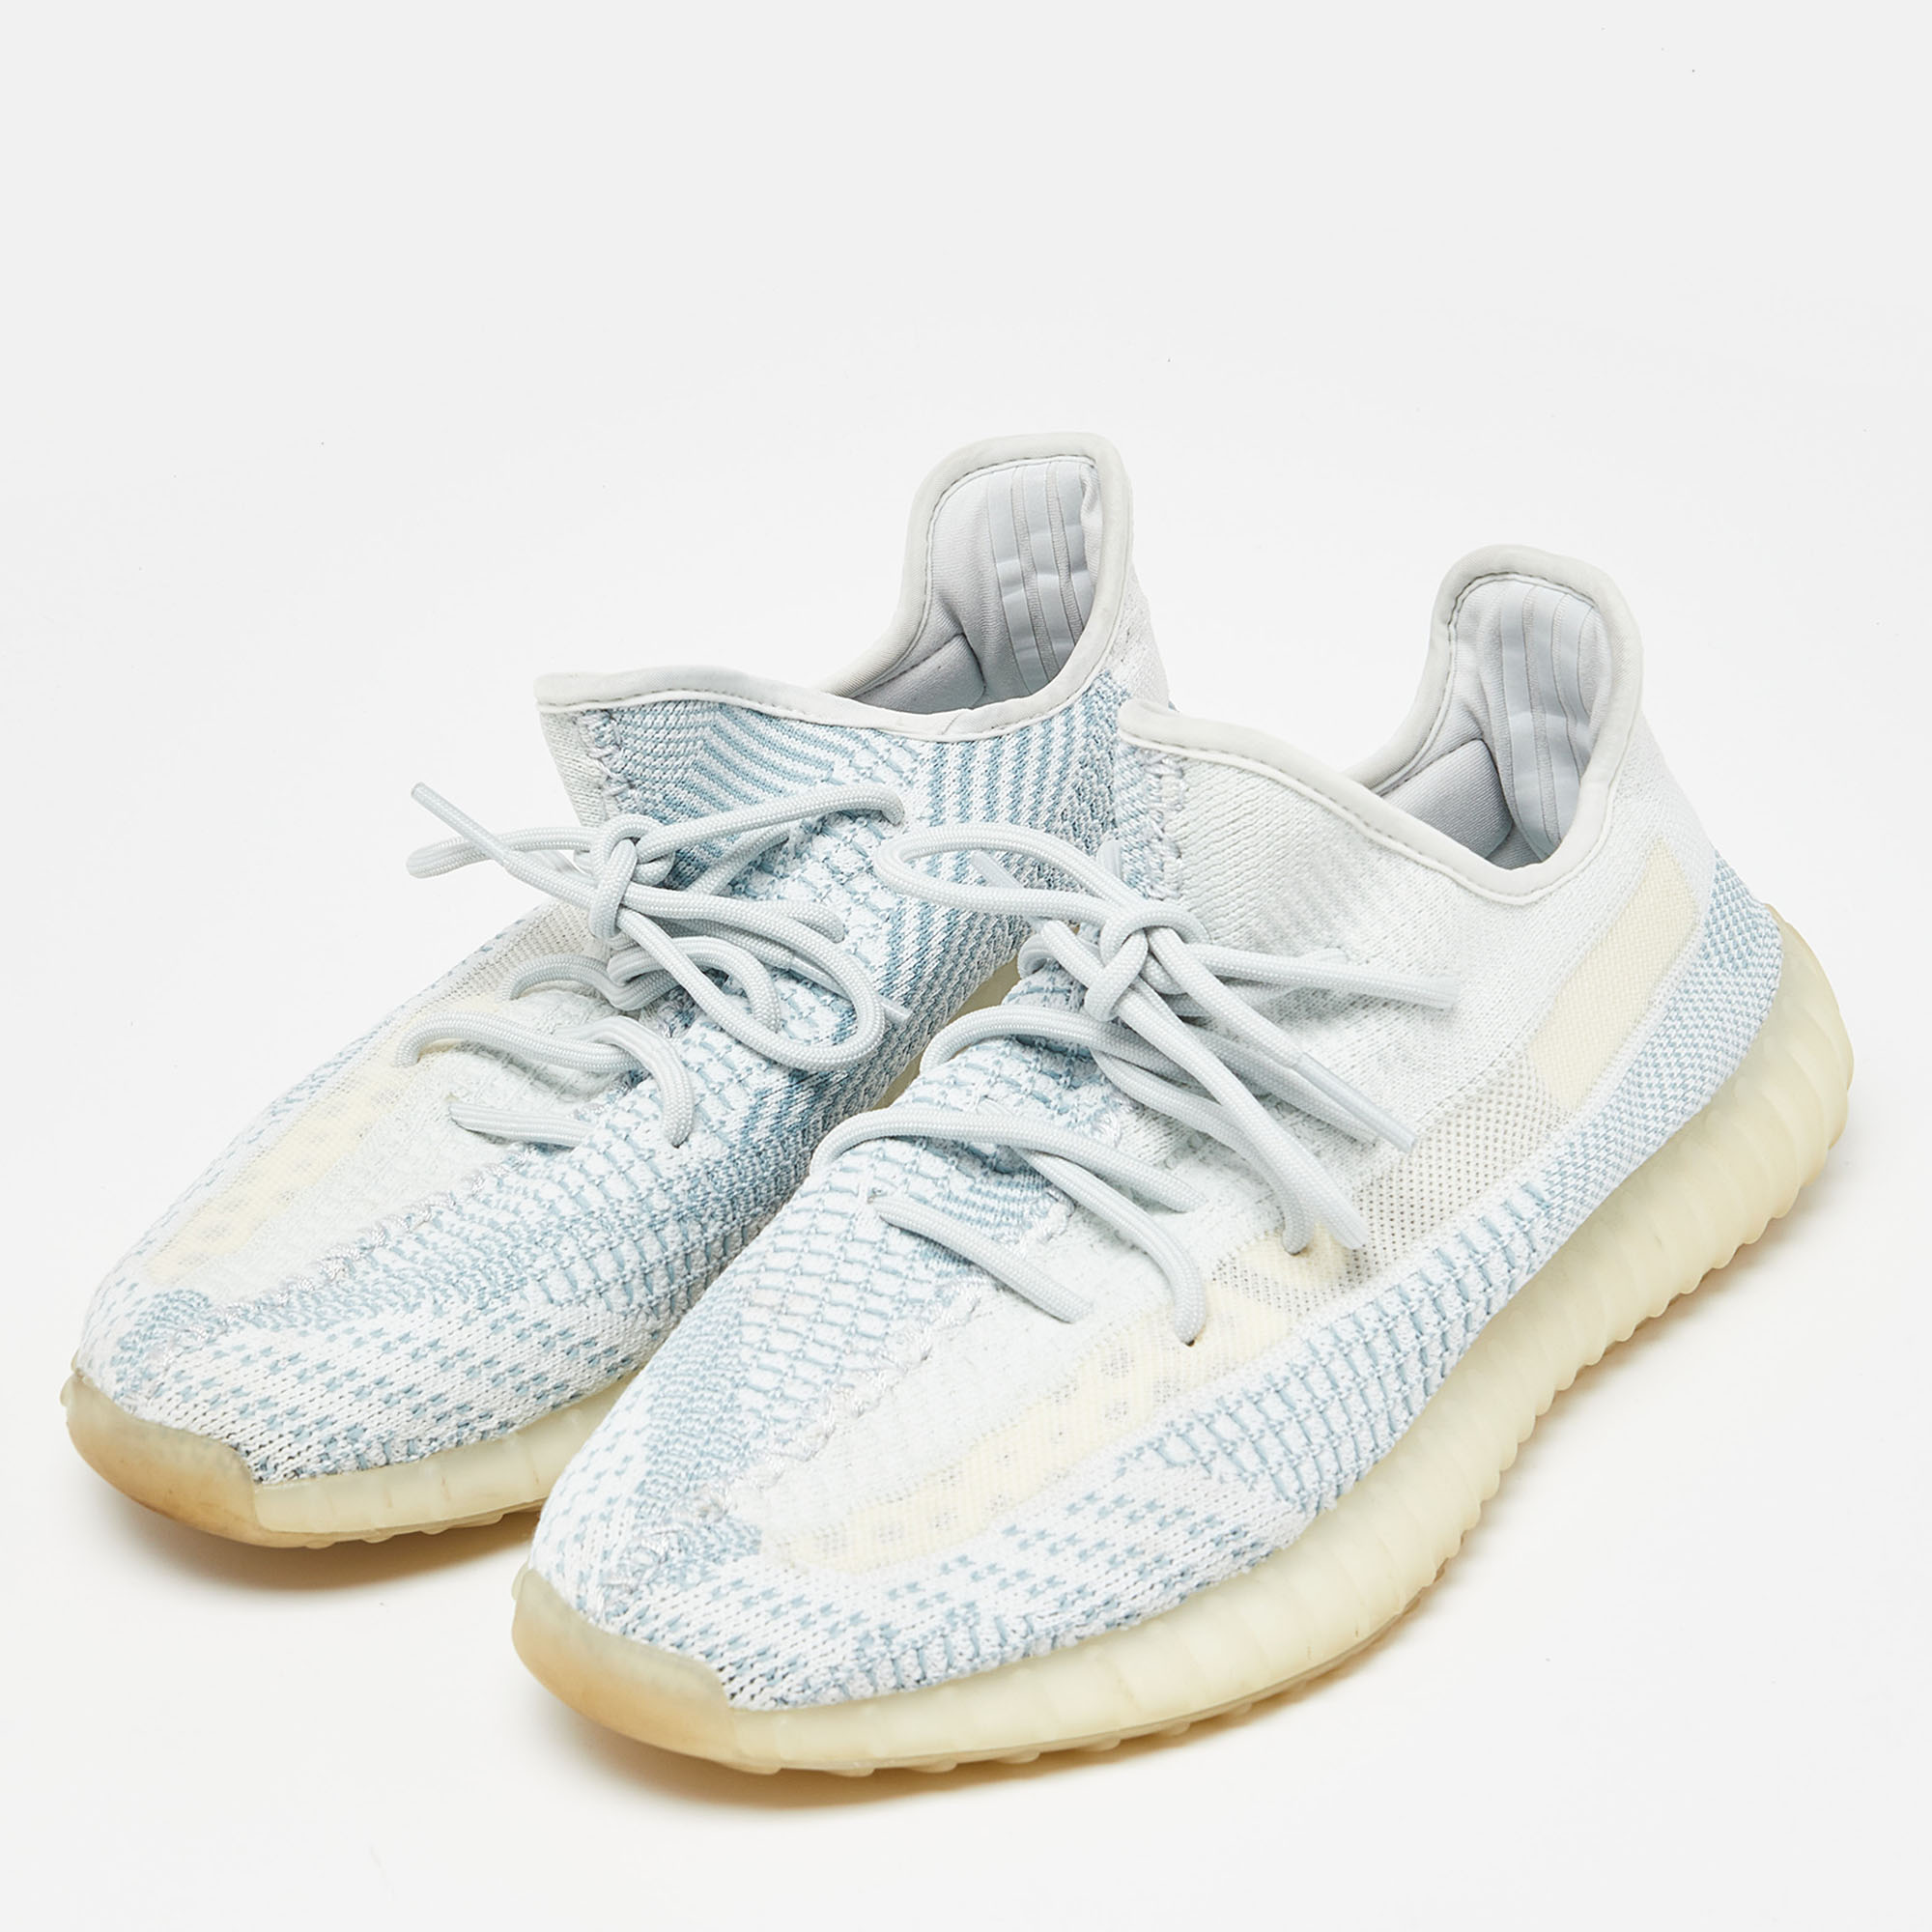 

Yeezy x Adidas Pale Green Knit Fabric Boost 350 V2 Cloud White Non Reflective Sneakers Size 46 2/3